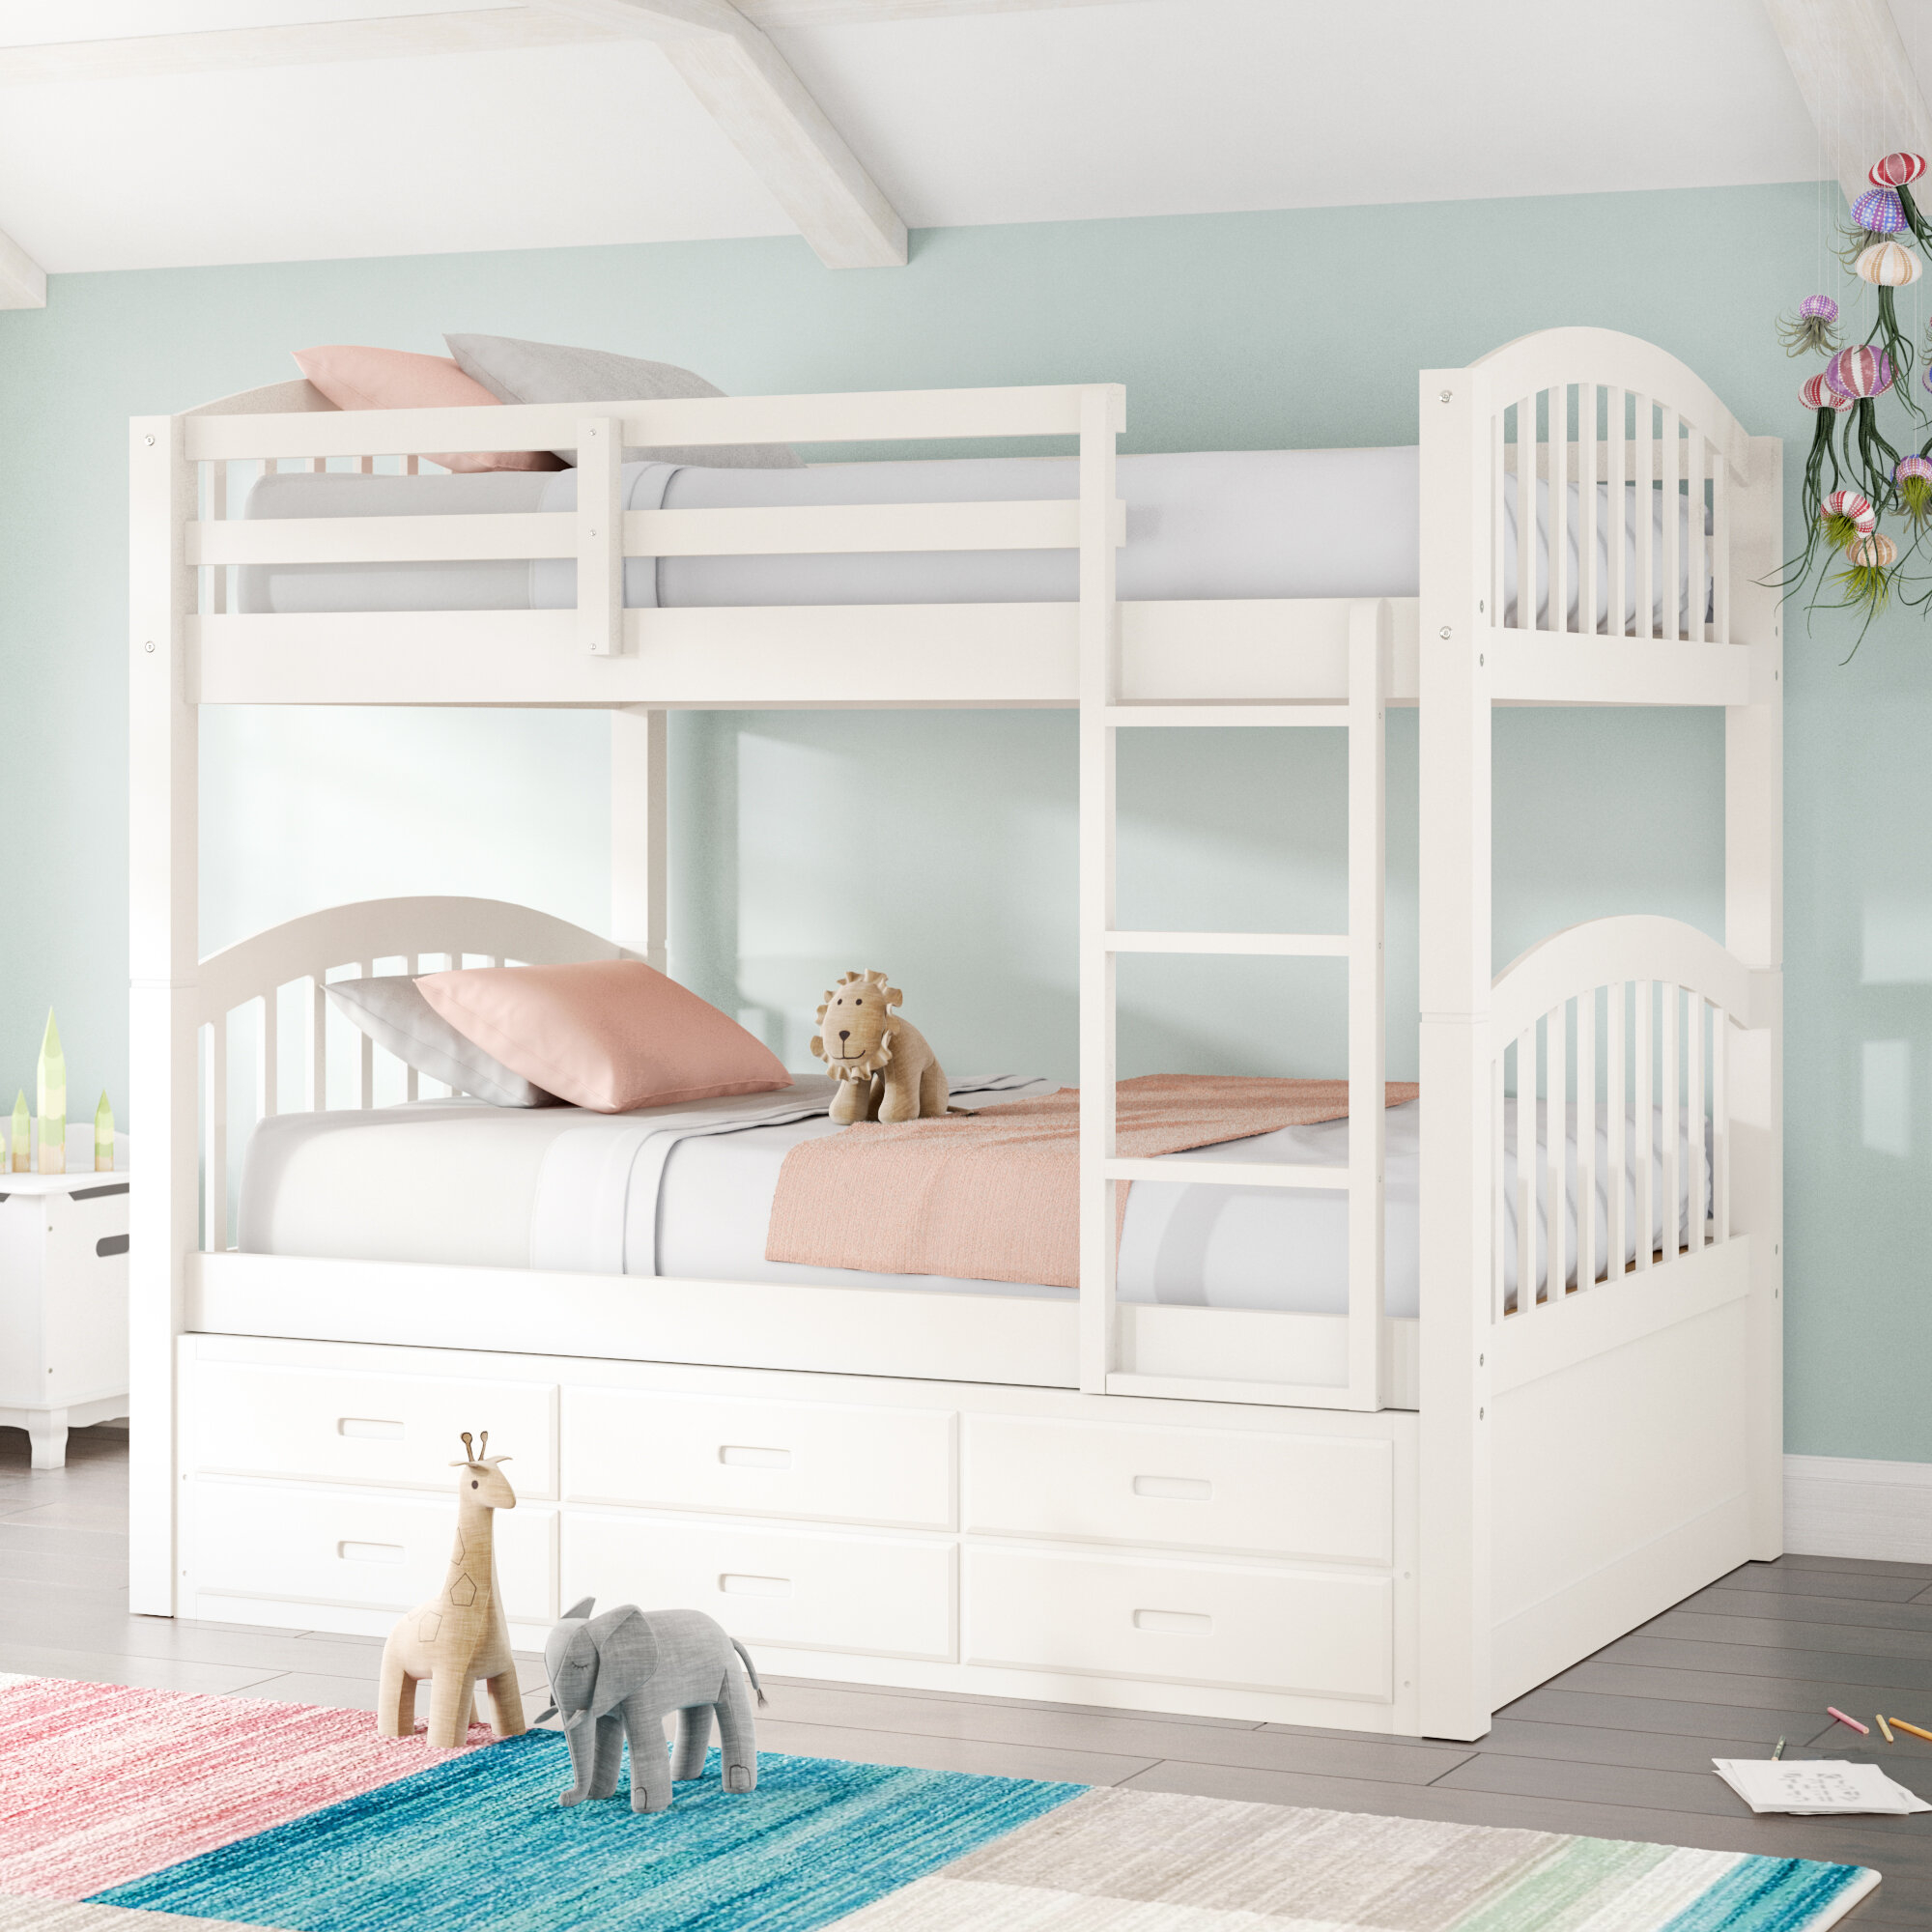 Bunk Beds With Dressers Visualhunt, Espresso Chamblee Twin Over Bunk Bed With Trundle And Drawers